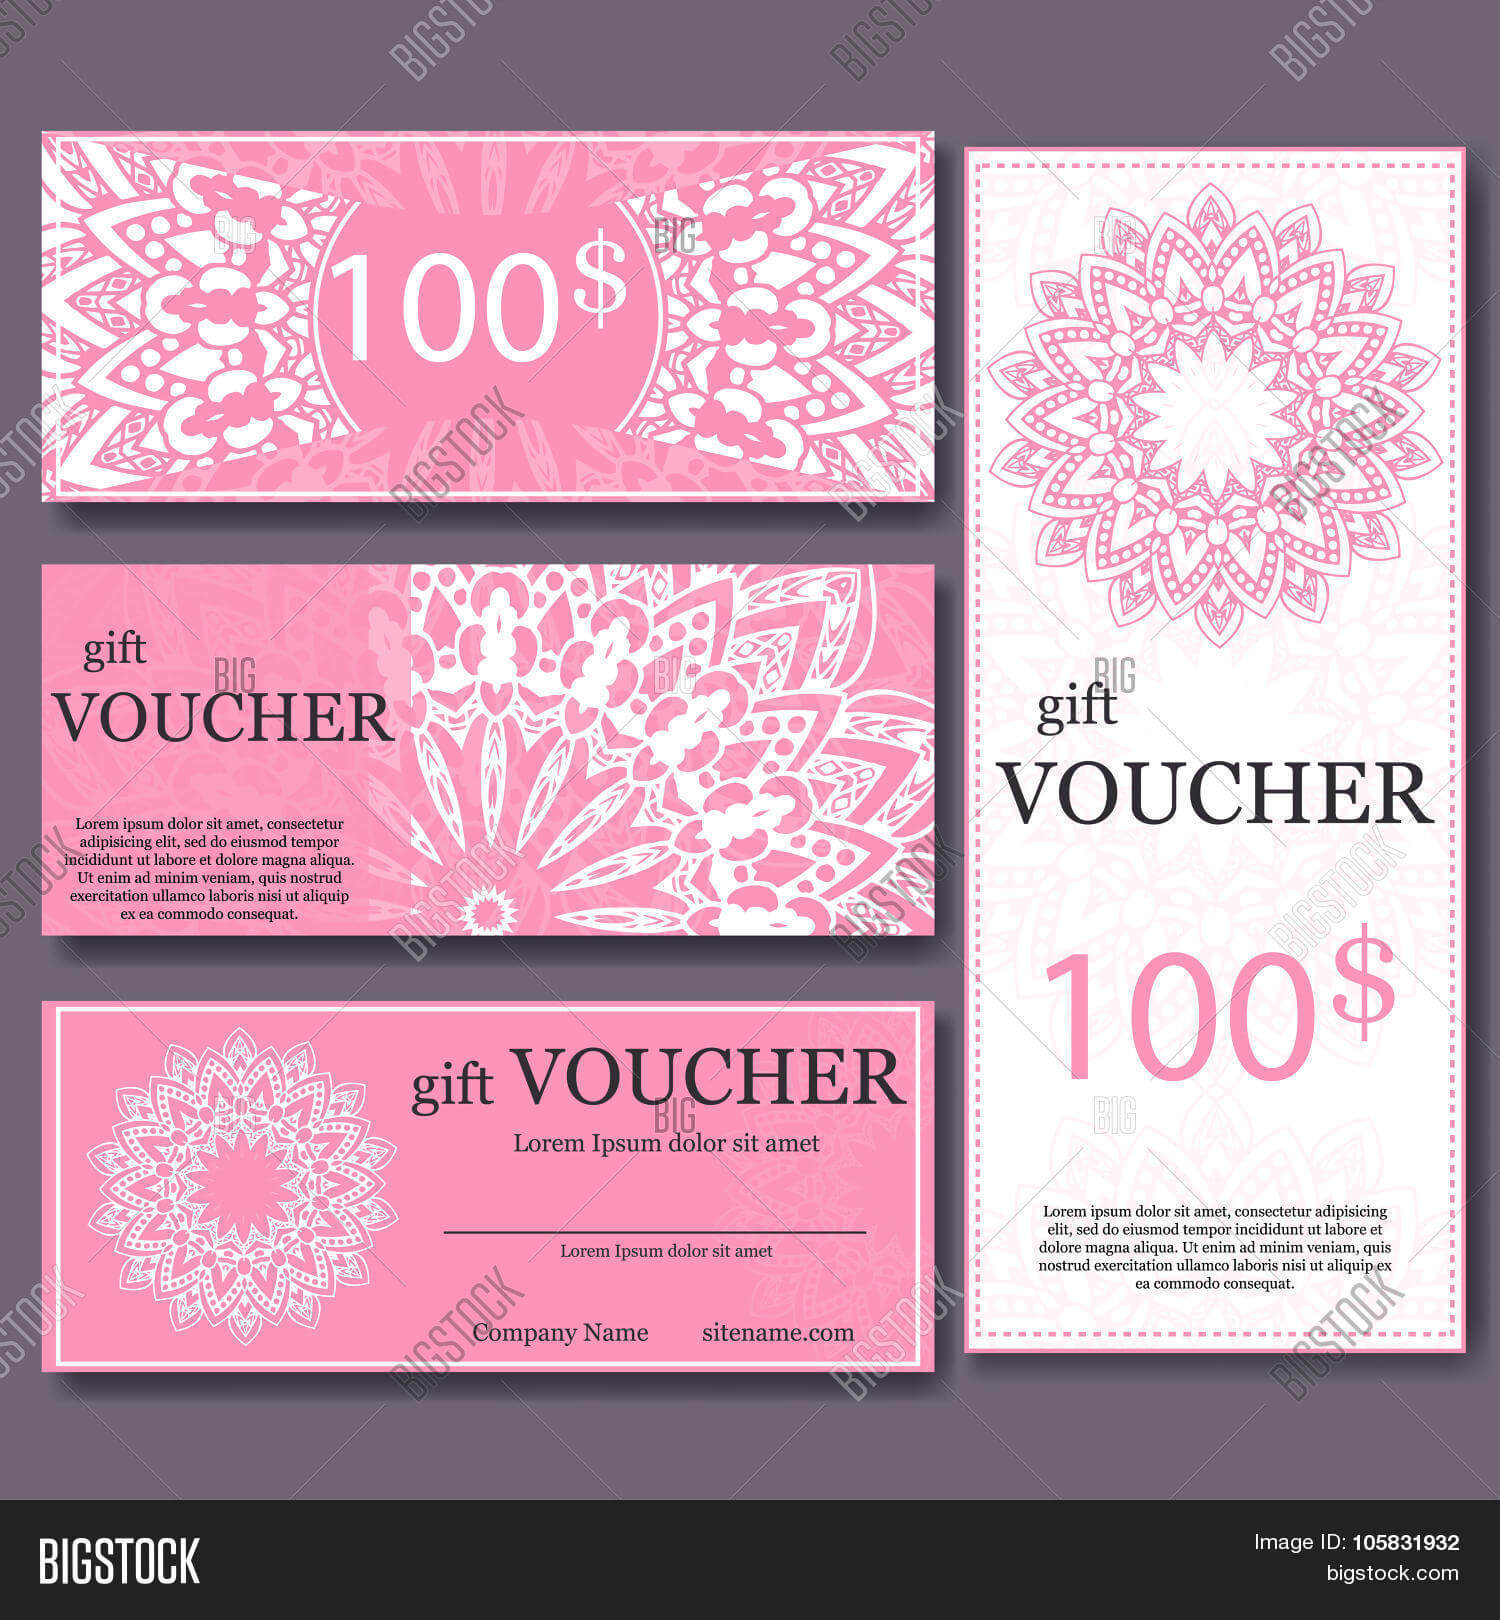 Gift Voucher Template Vector & Photo (Free Trial) | Bigstock Intended For Magazine Subscription Gift Certificate Template